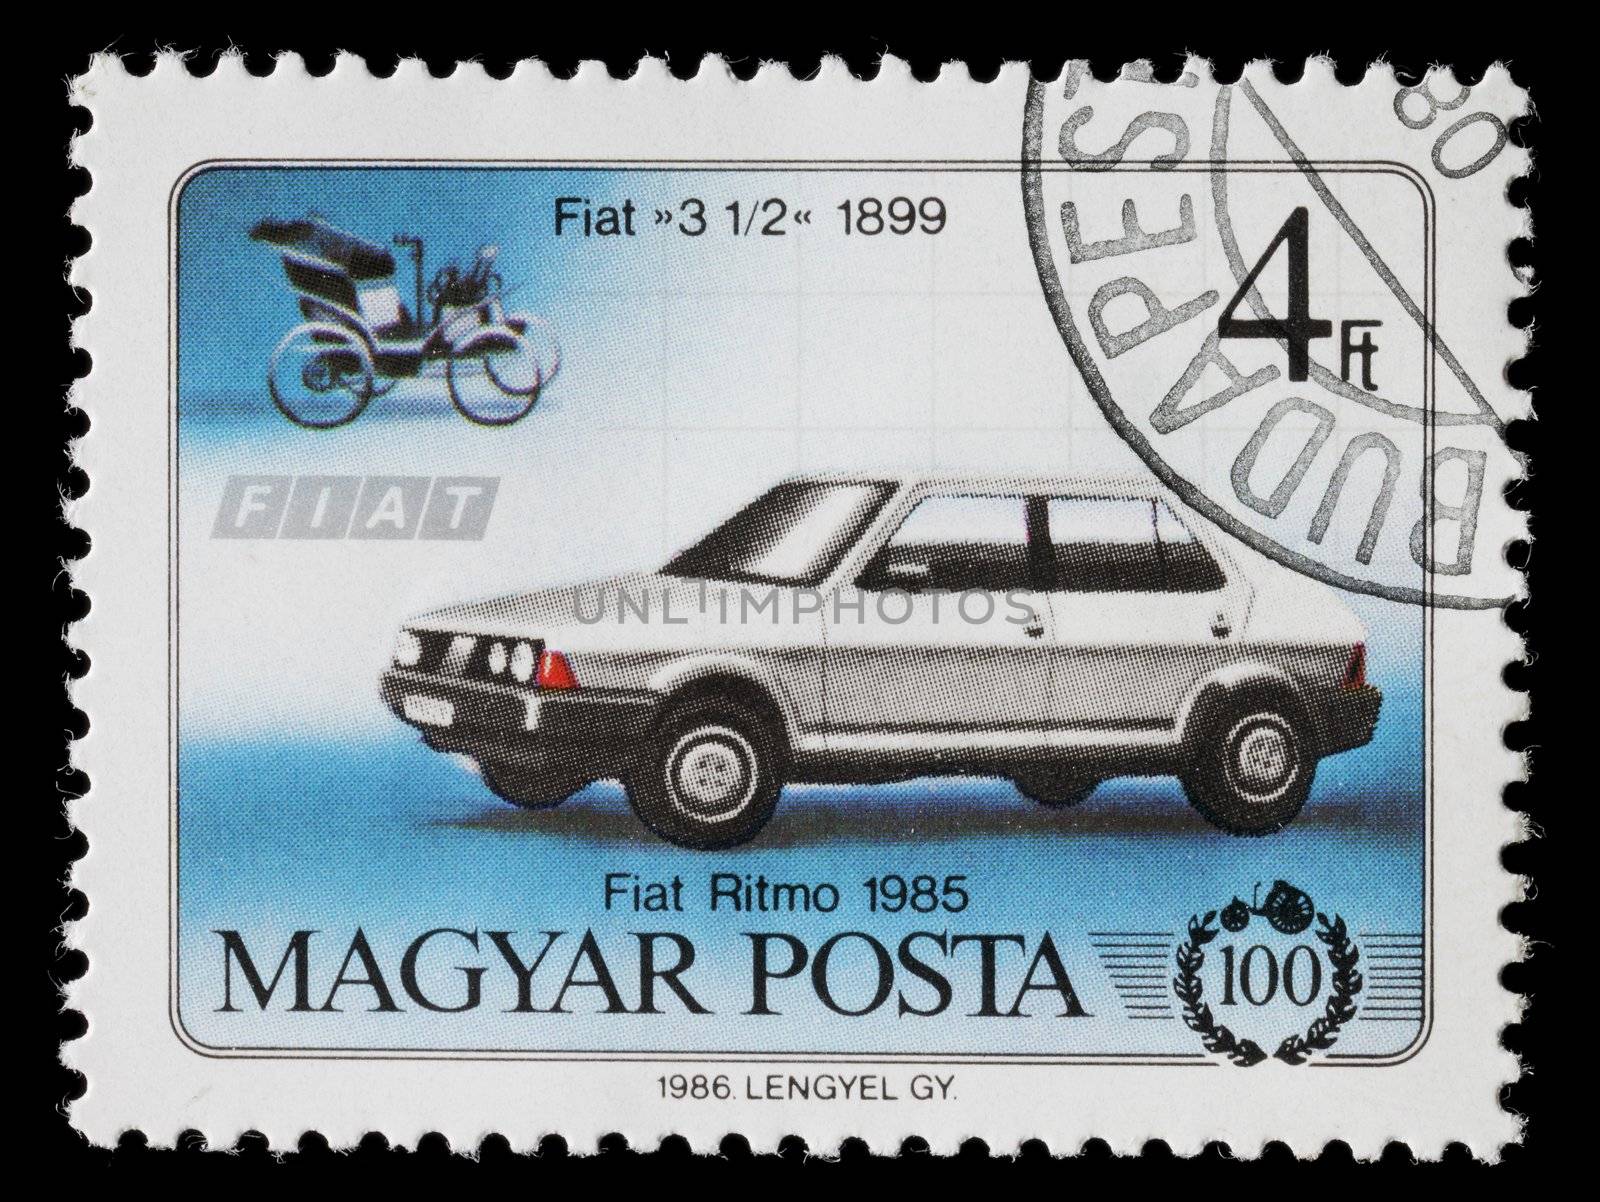 Fiat Stamp by Stocksnapper